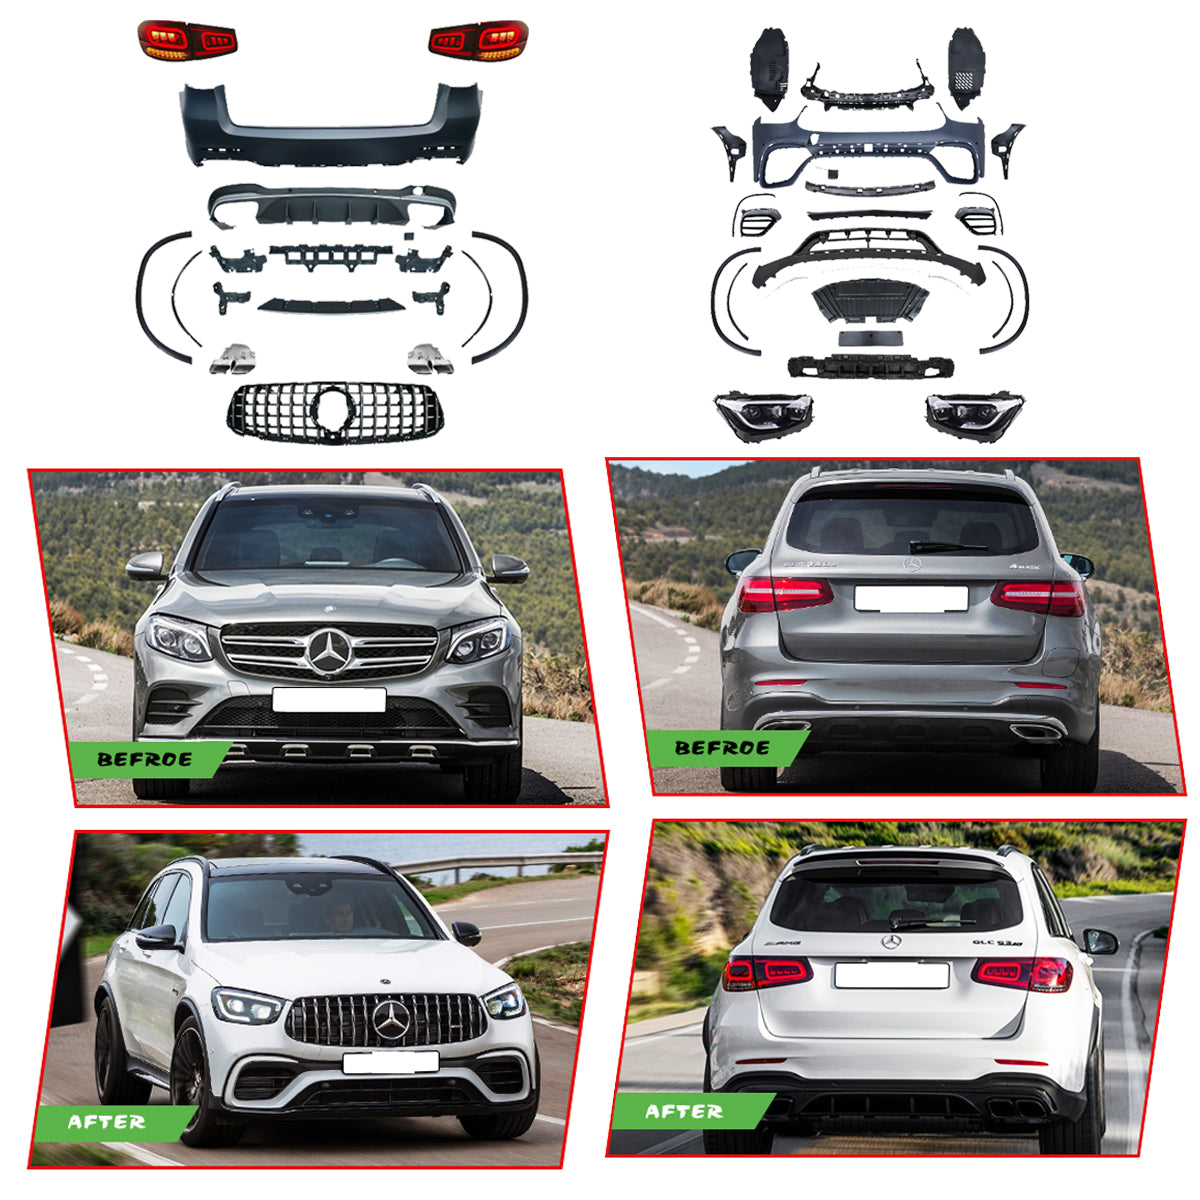 THE BODY KIT FOR MERCEDES BENZ GLC-CLASS X253 2016-2019 UPGRADE TO 2021 GLC63 AMG STYLE